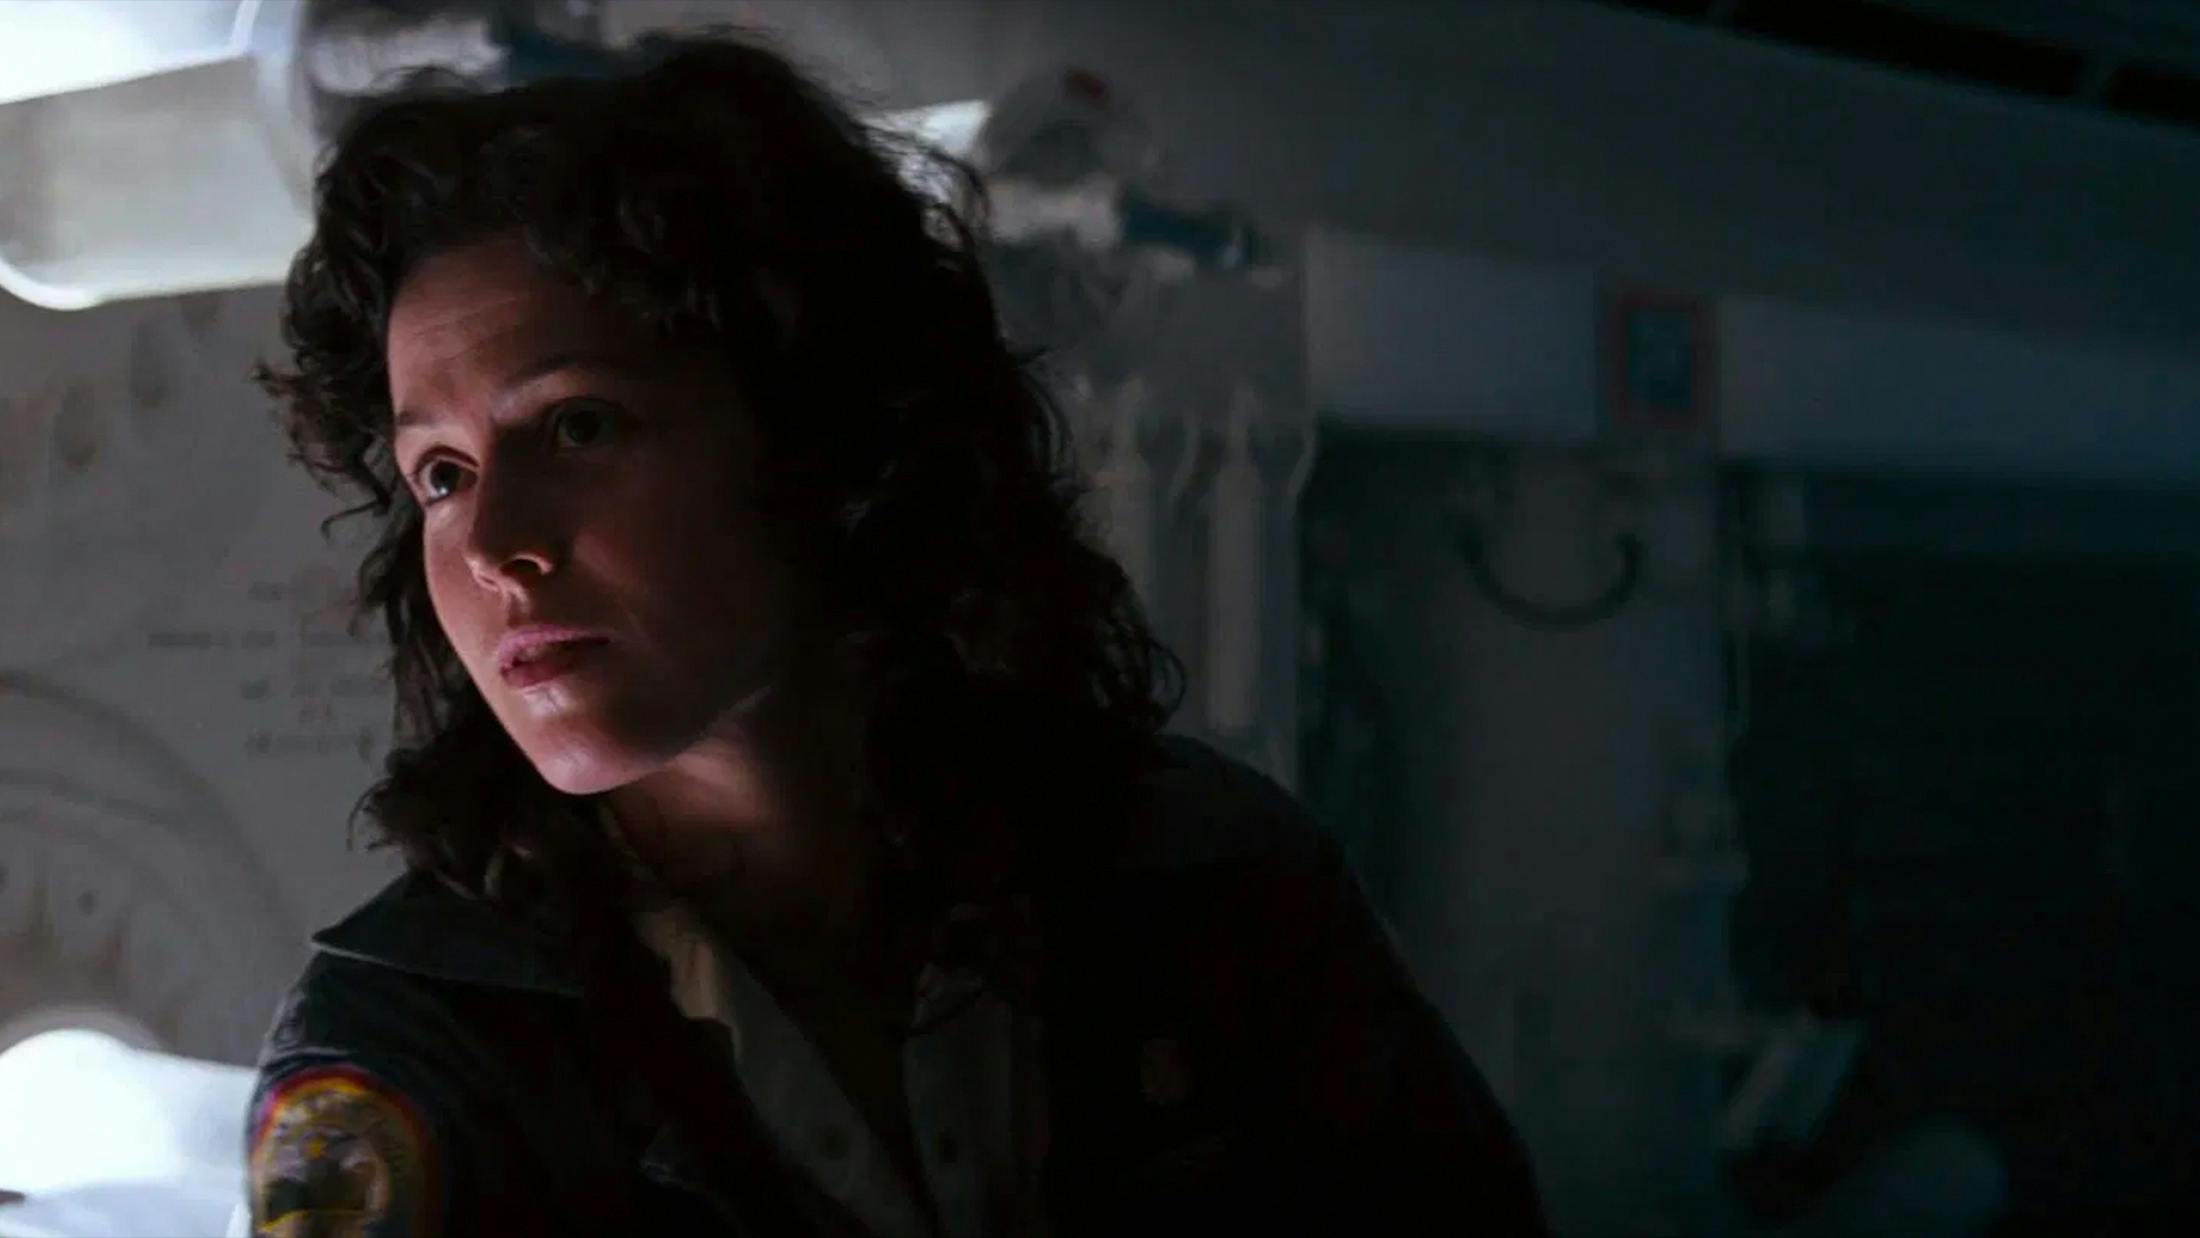 "There’s no movie like it": Why Alien continues to terrify and inspire musicians